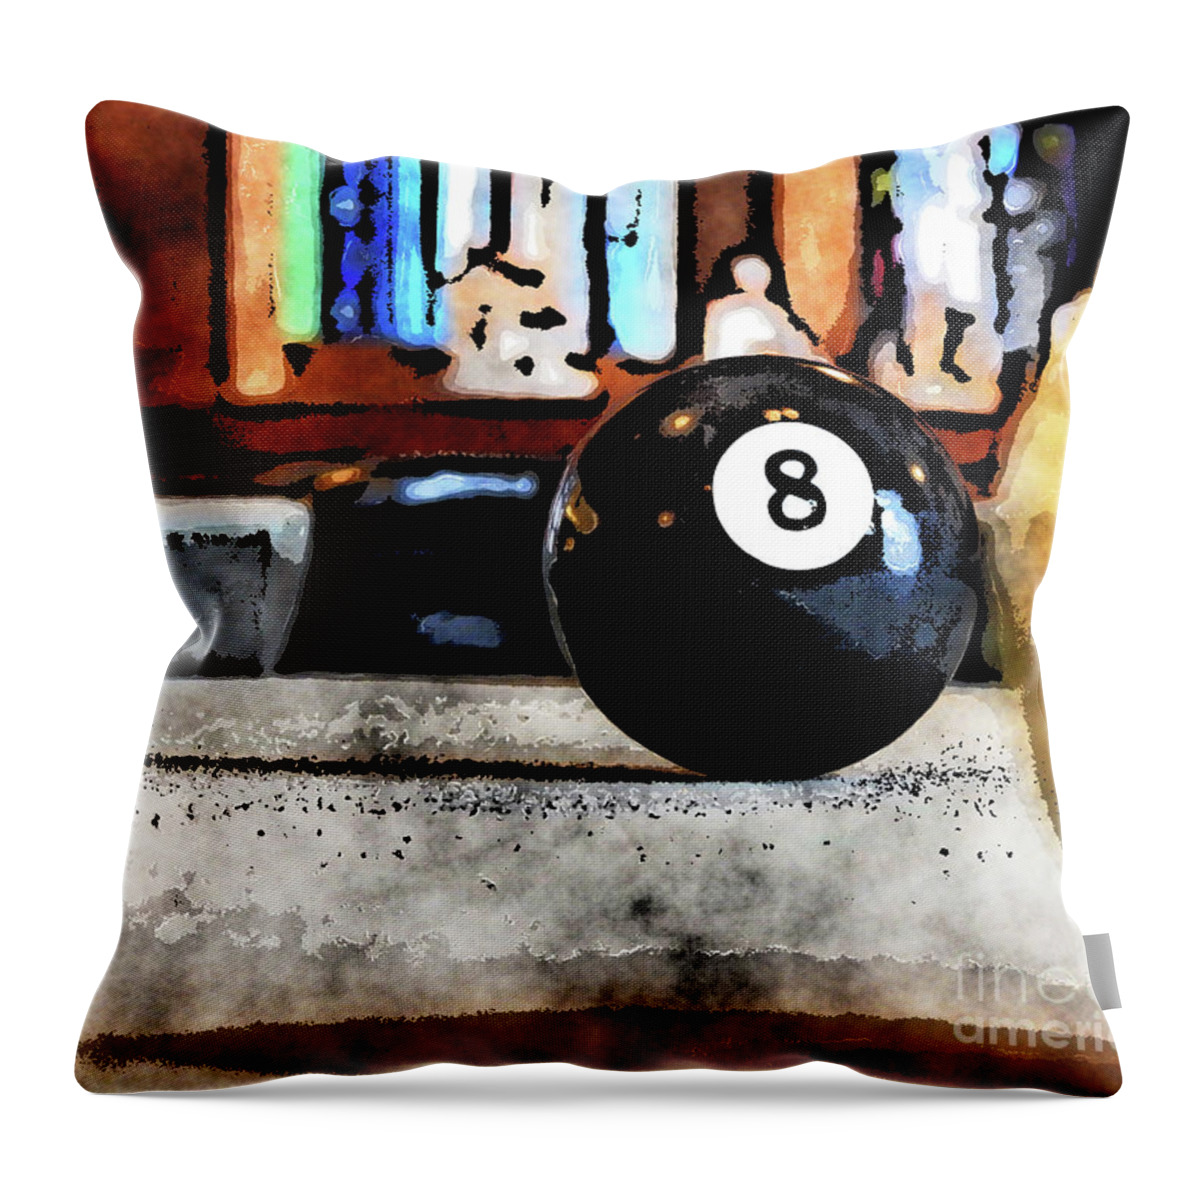 Pool Throw Pillow featuring the digital art Shooting For The Eight Ball by Phil Perkins